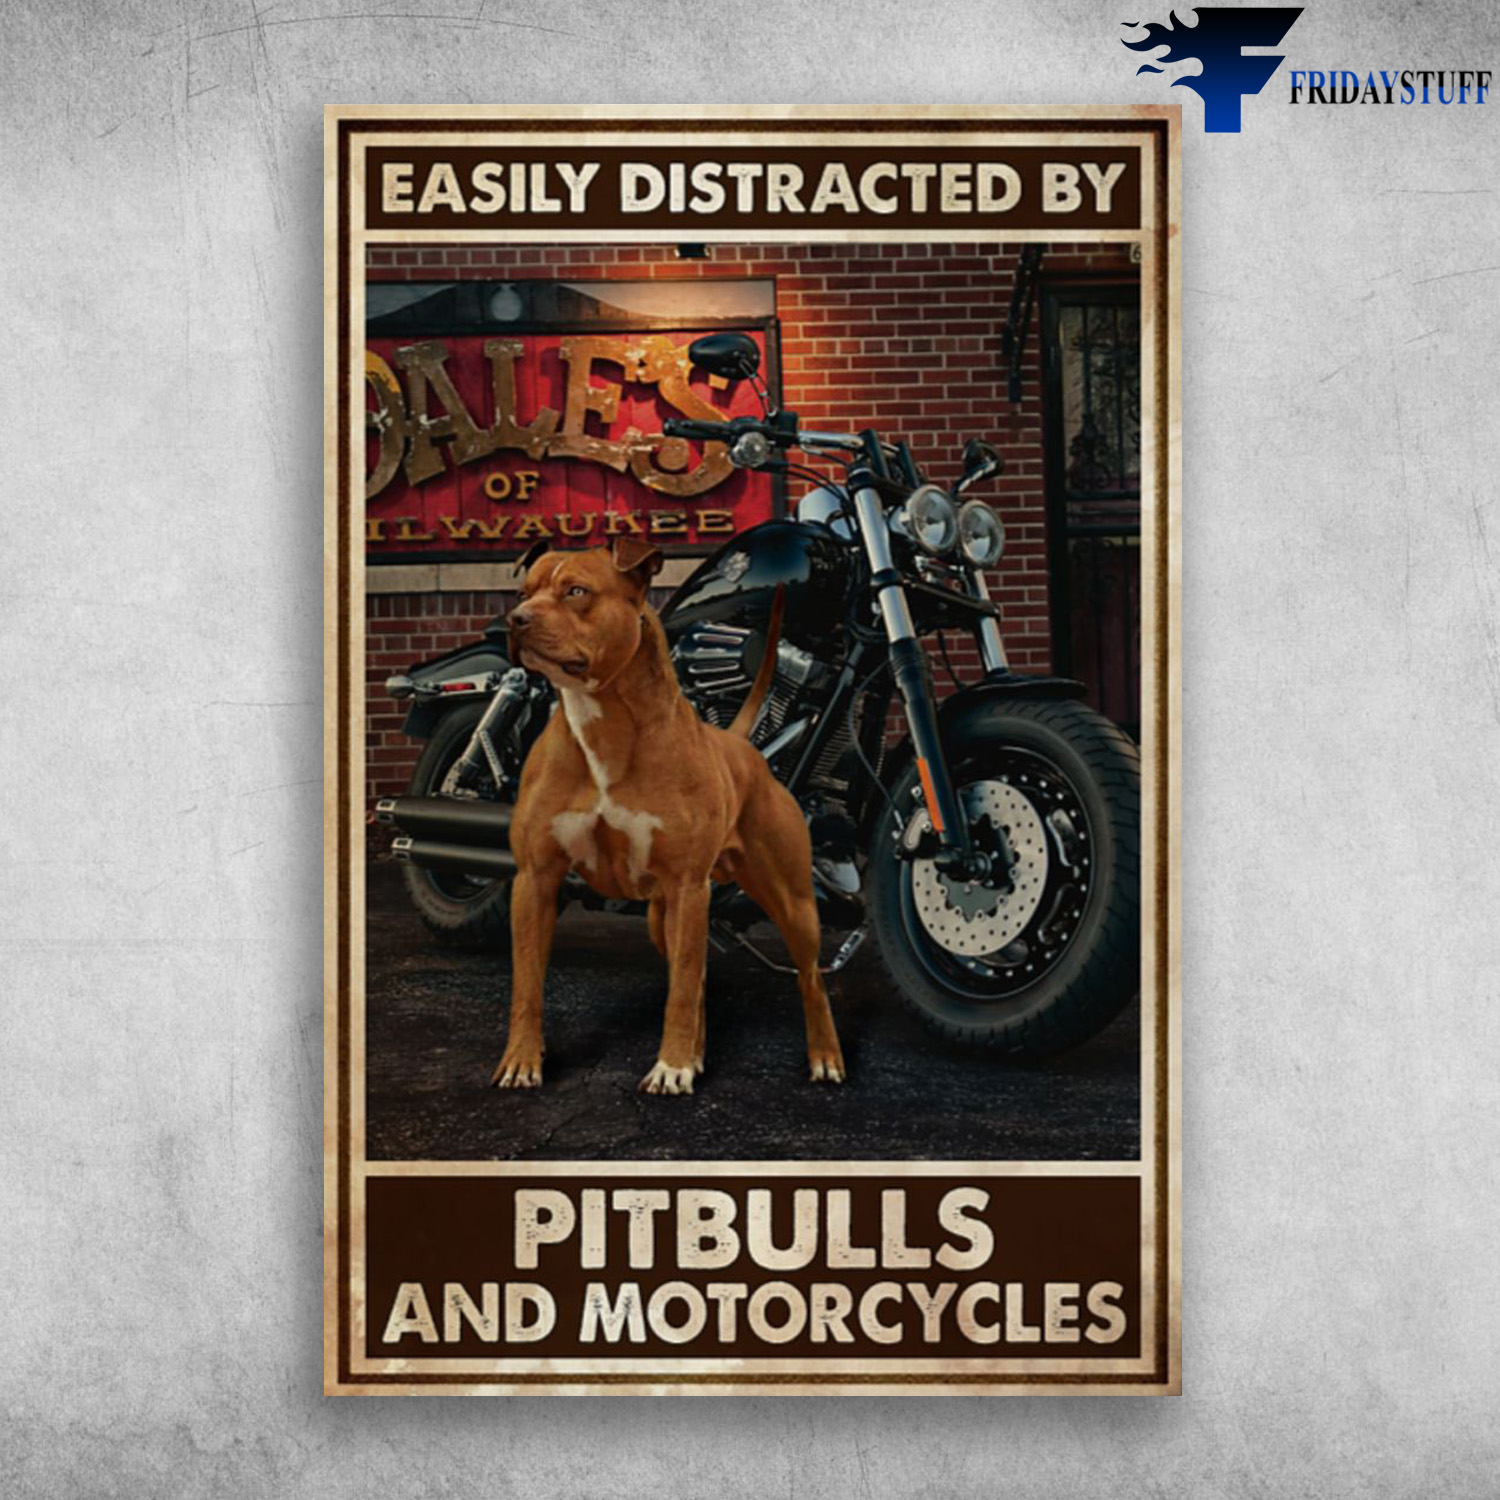 Pitbulls And Motorcycles - Easily Distracted By Pitbulls And Mortorcycles